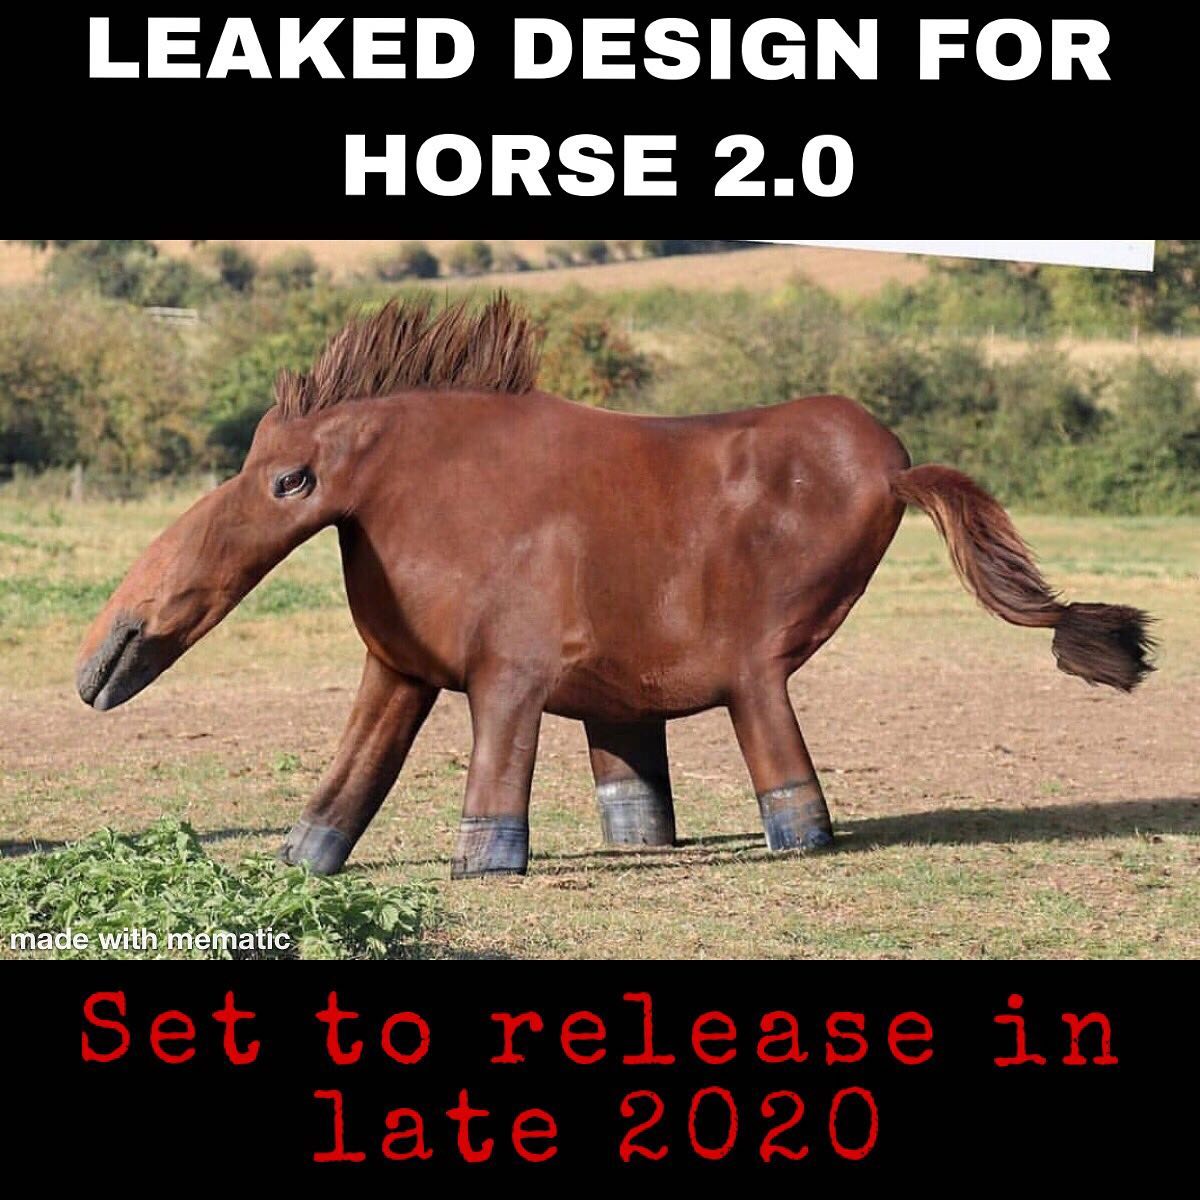 surreal memes - leaked design for horse 2.0 - Leaked Design For Horse 2.0 made with mematic Set to release in late 2020